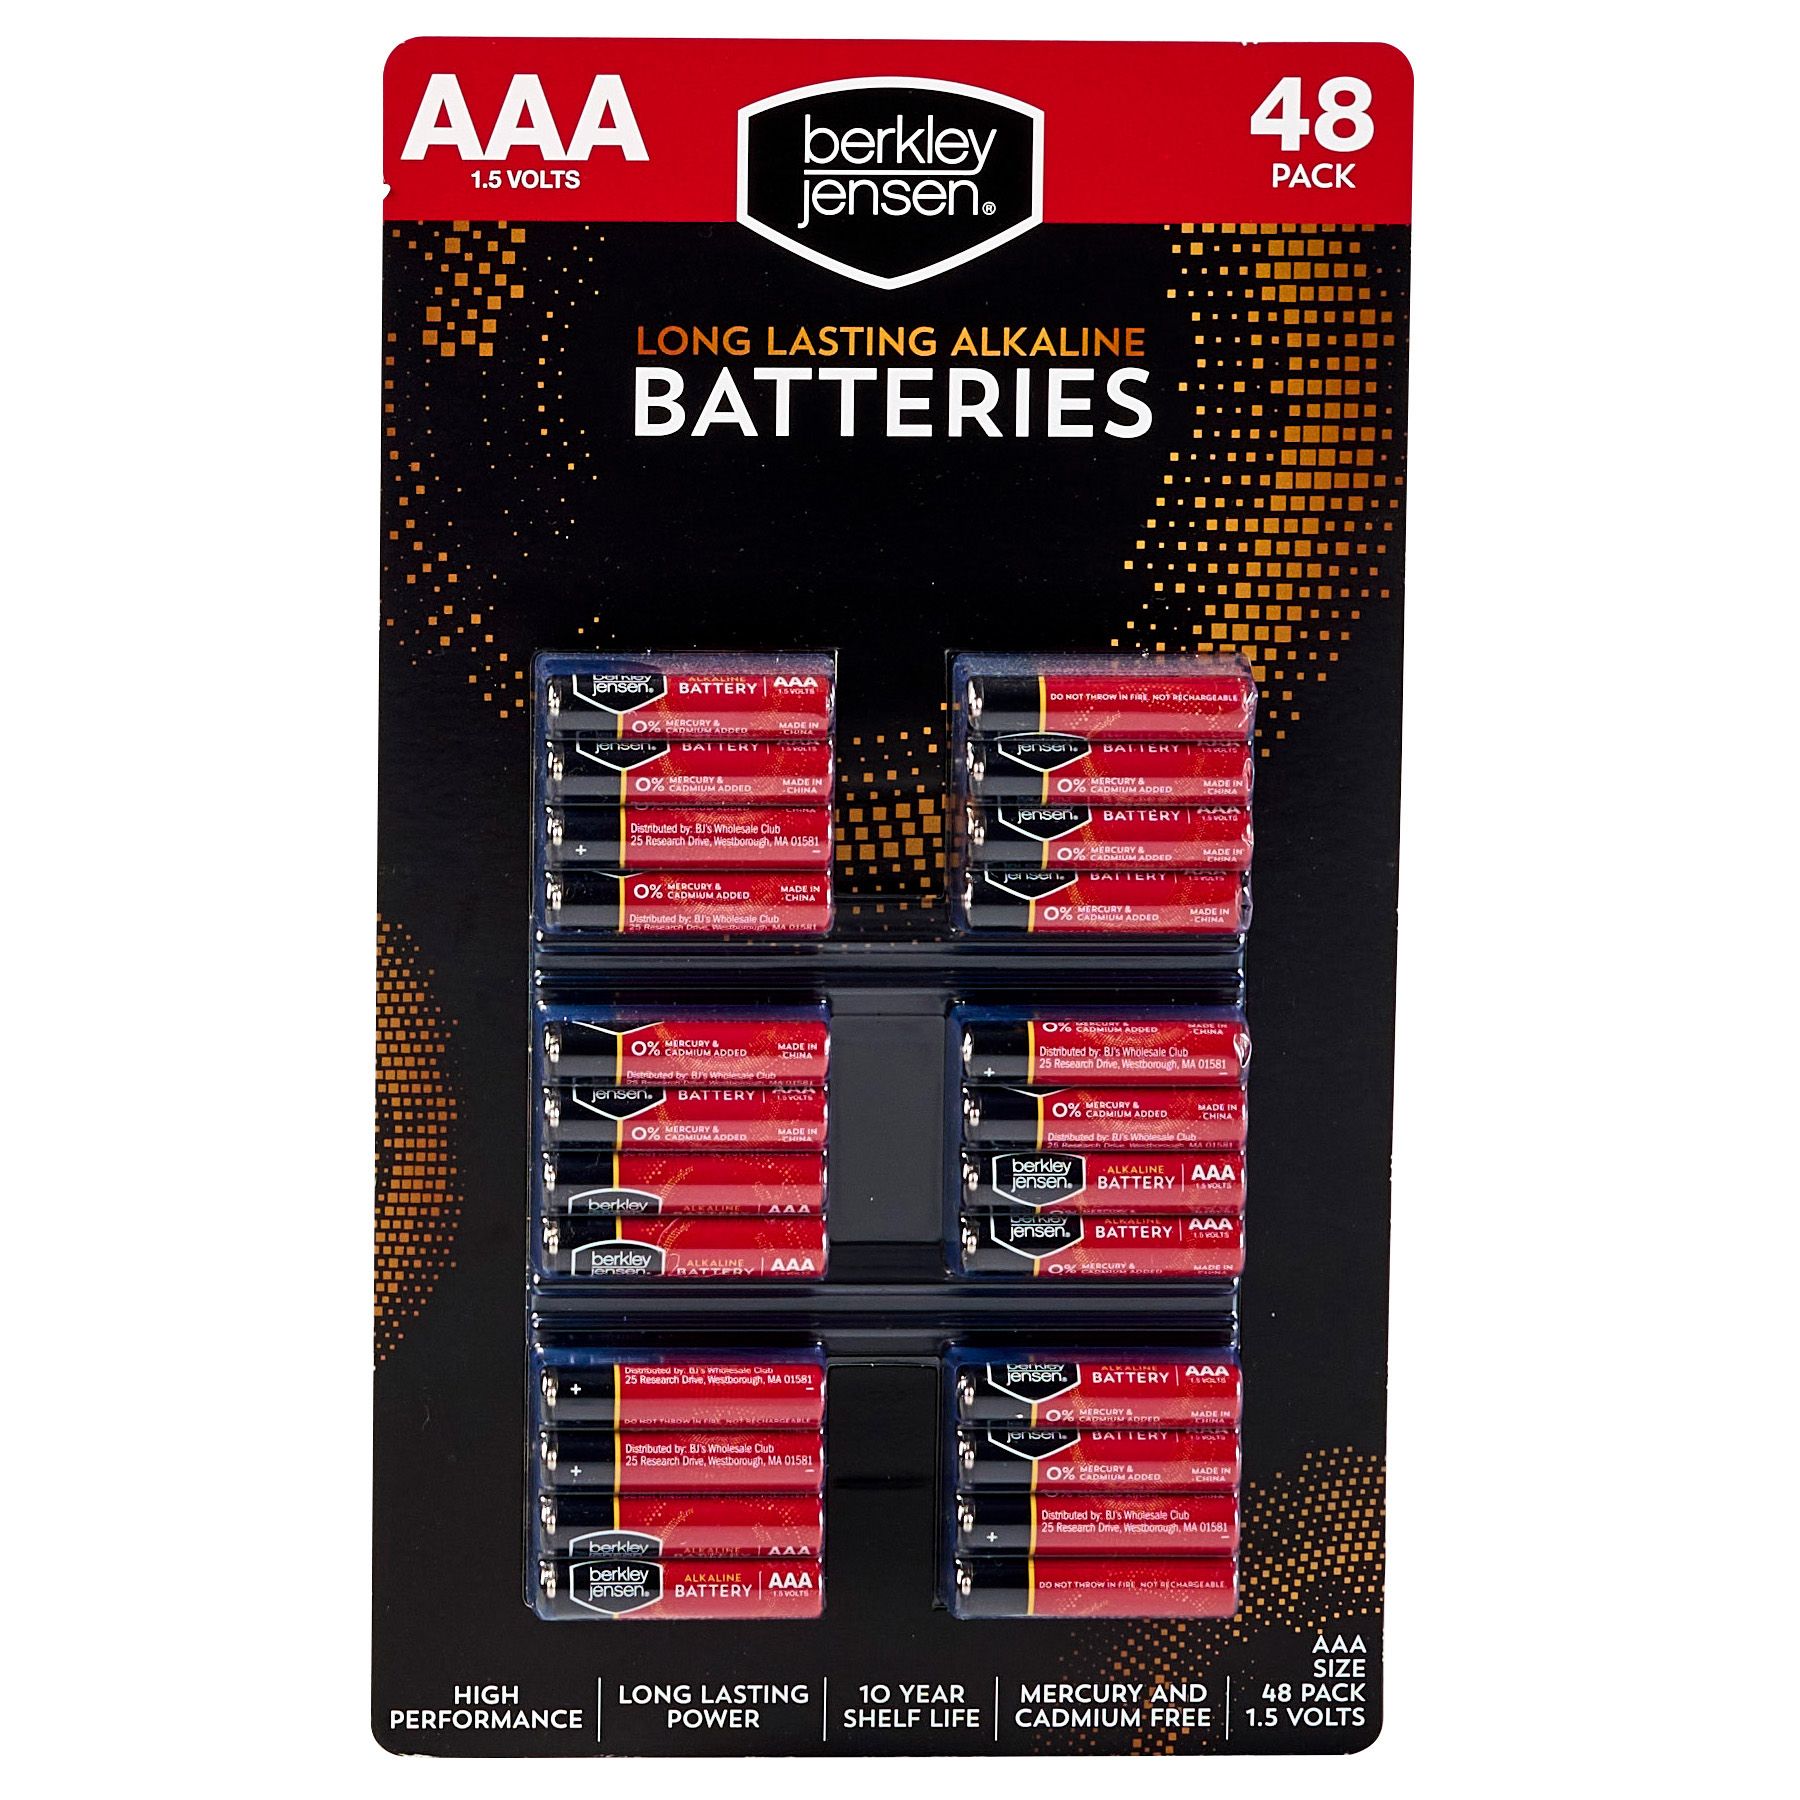 Energizer Ultimate Lithium AAA Batteries (18 Pack) - Sam's Club